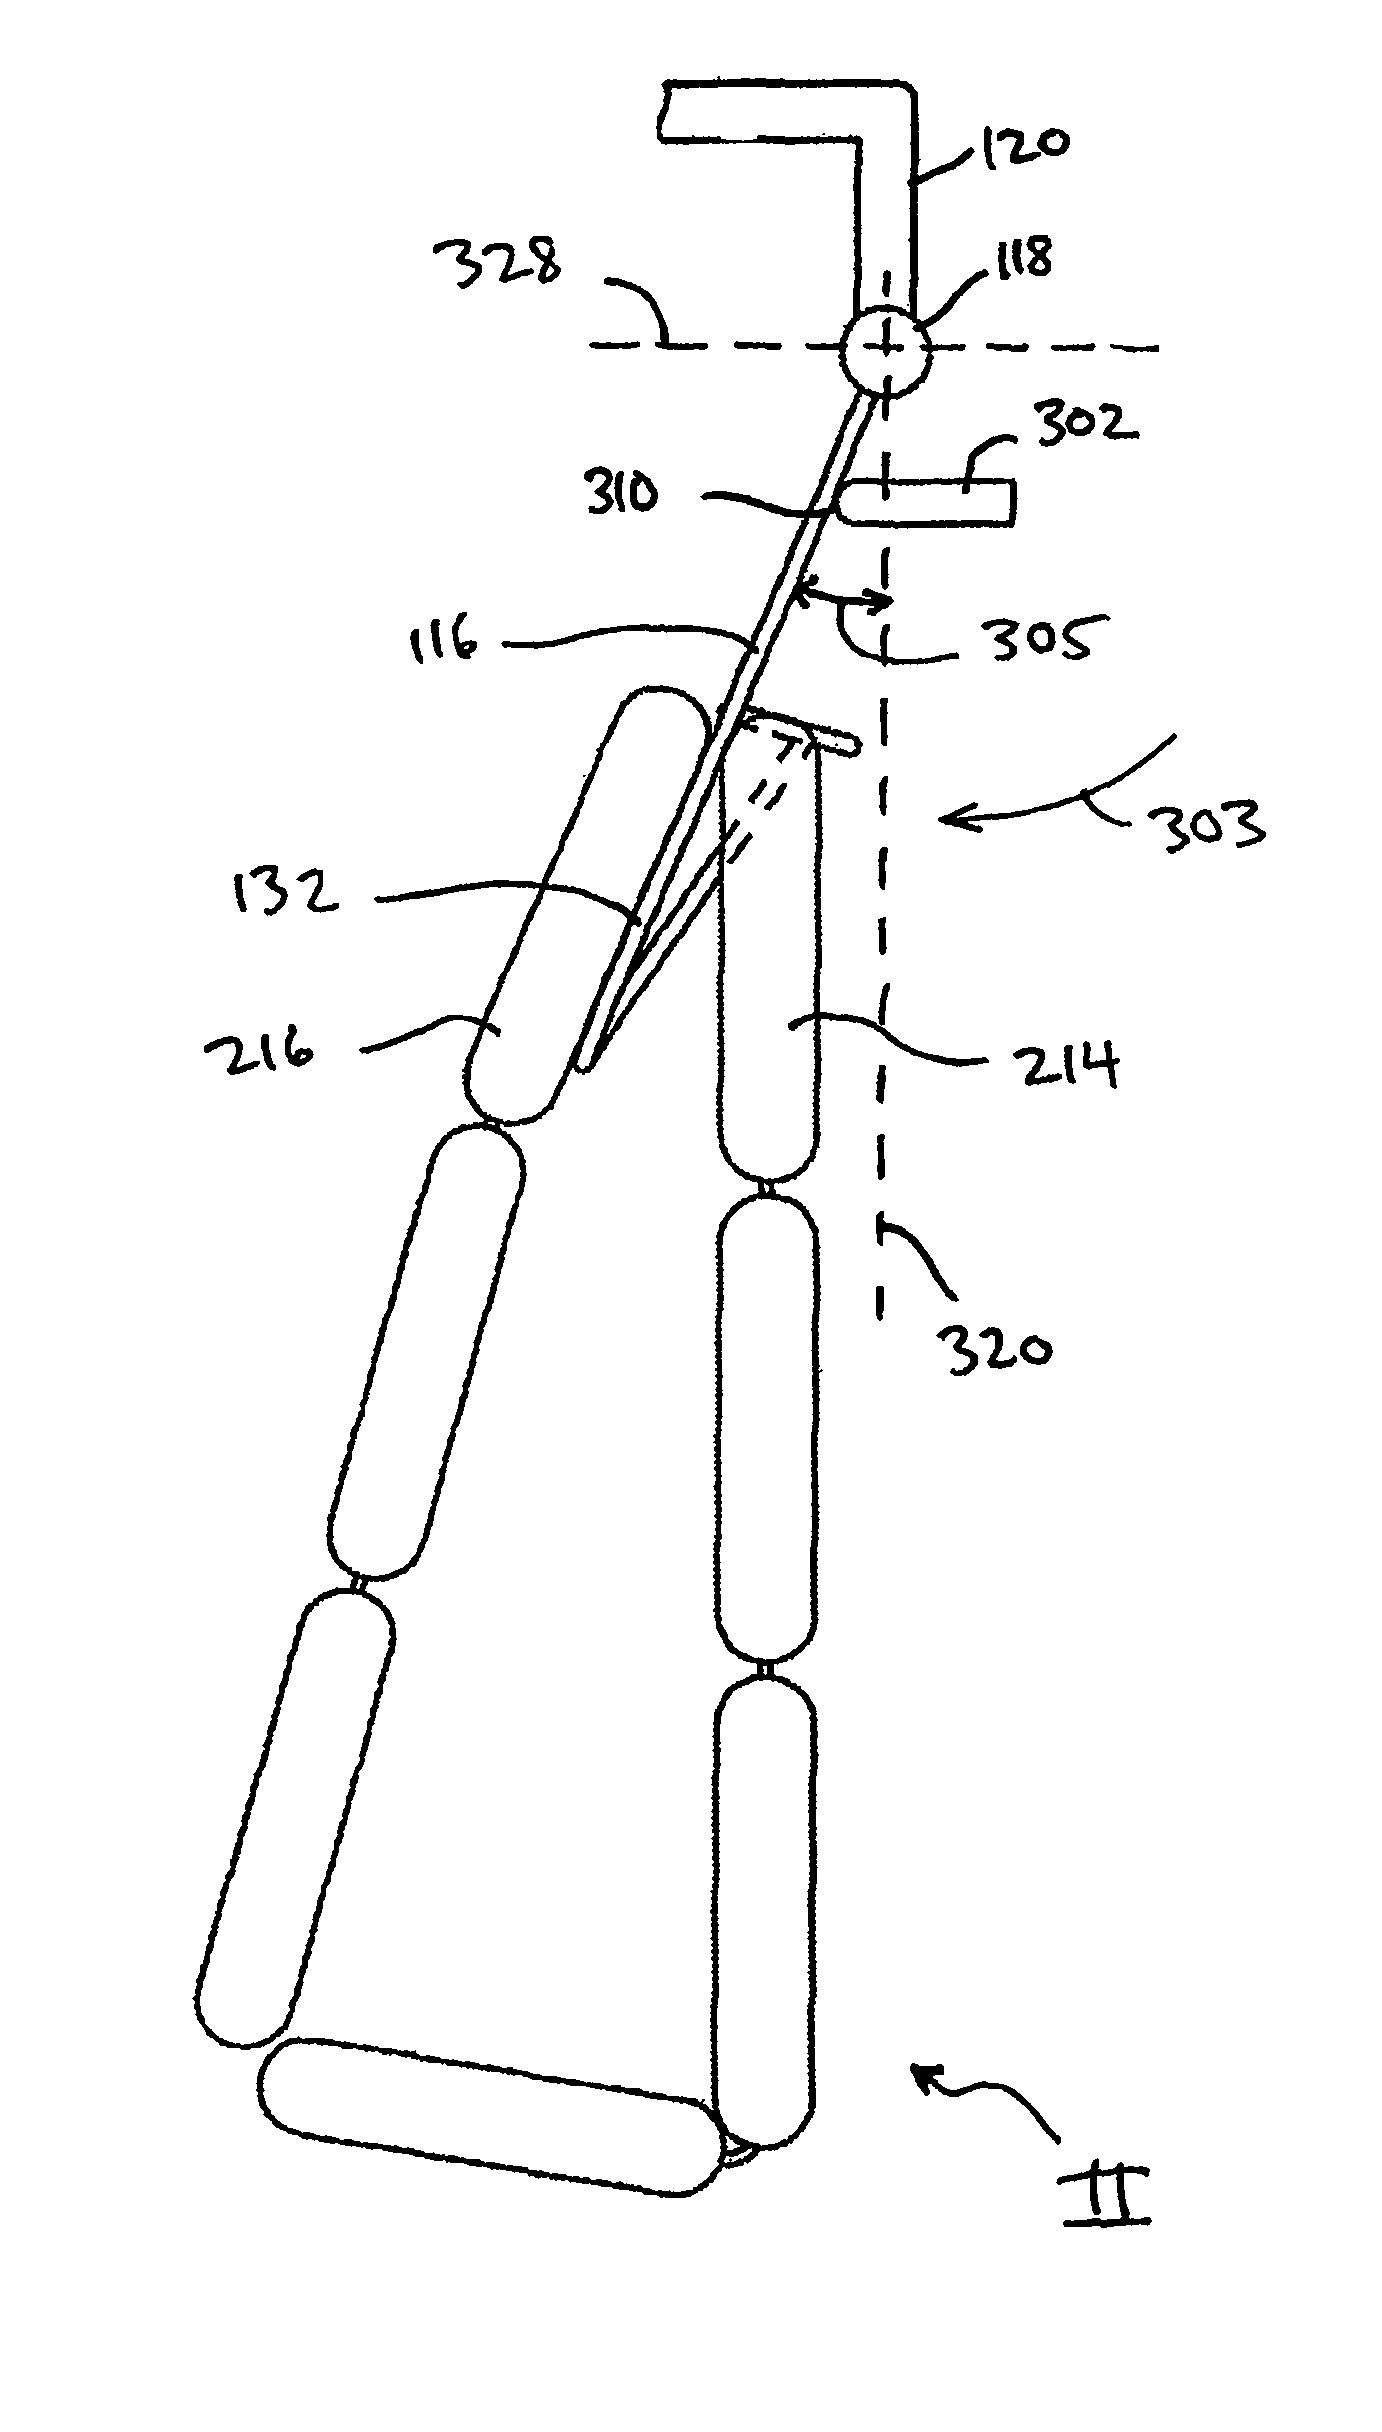 Suspension device for linked products